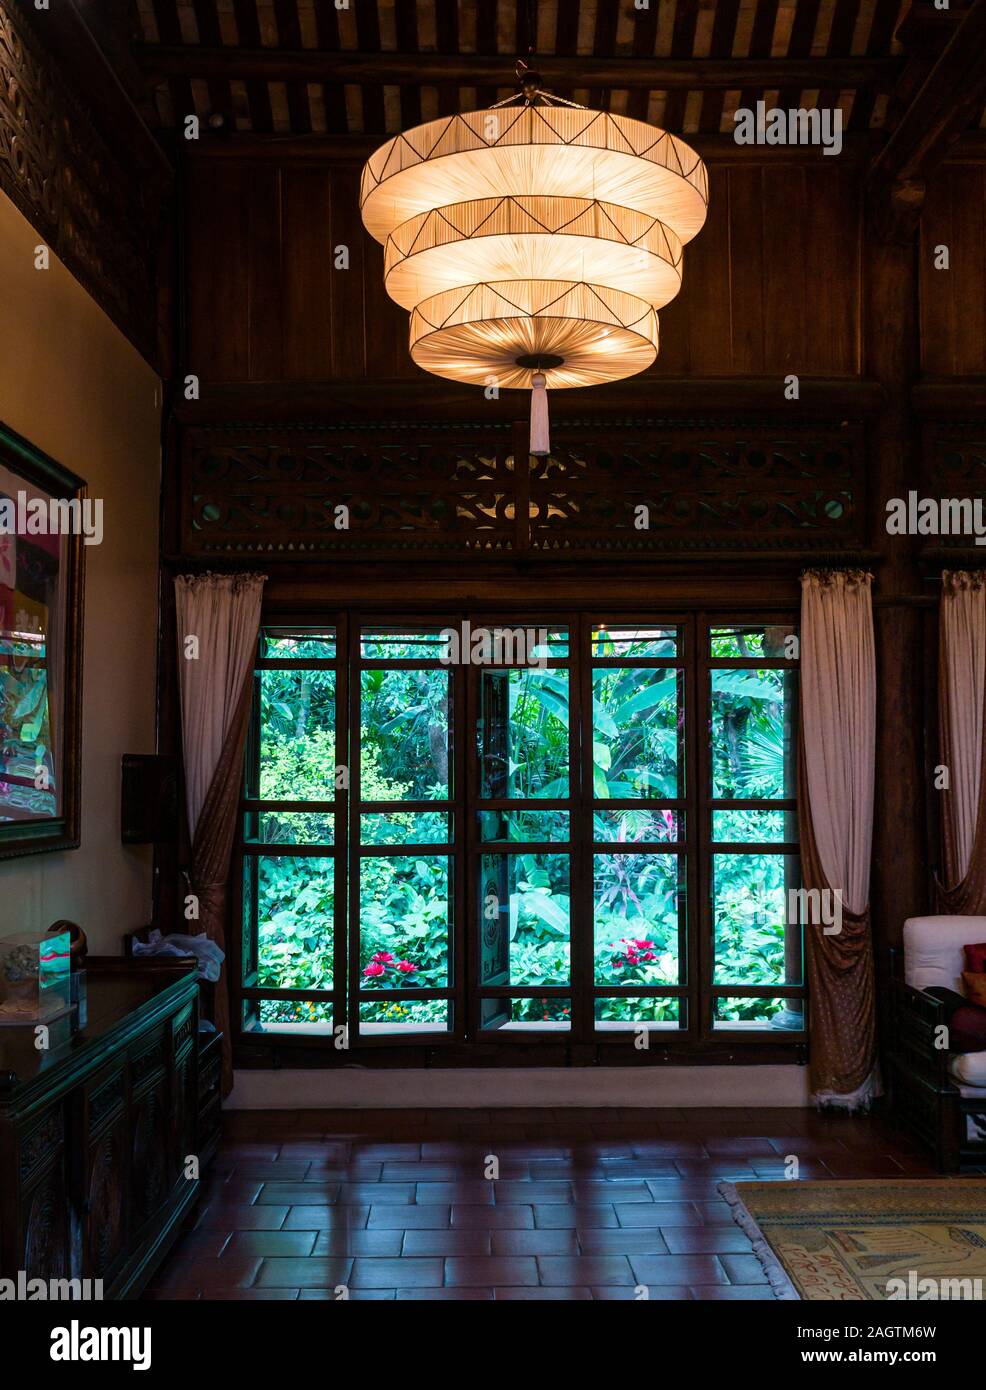 interior of traditional home looking out to garden through patio doors, Ho Tay suburb, West Lake, Hanoi, Vietnam, Asia Stock Photo